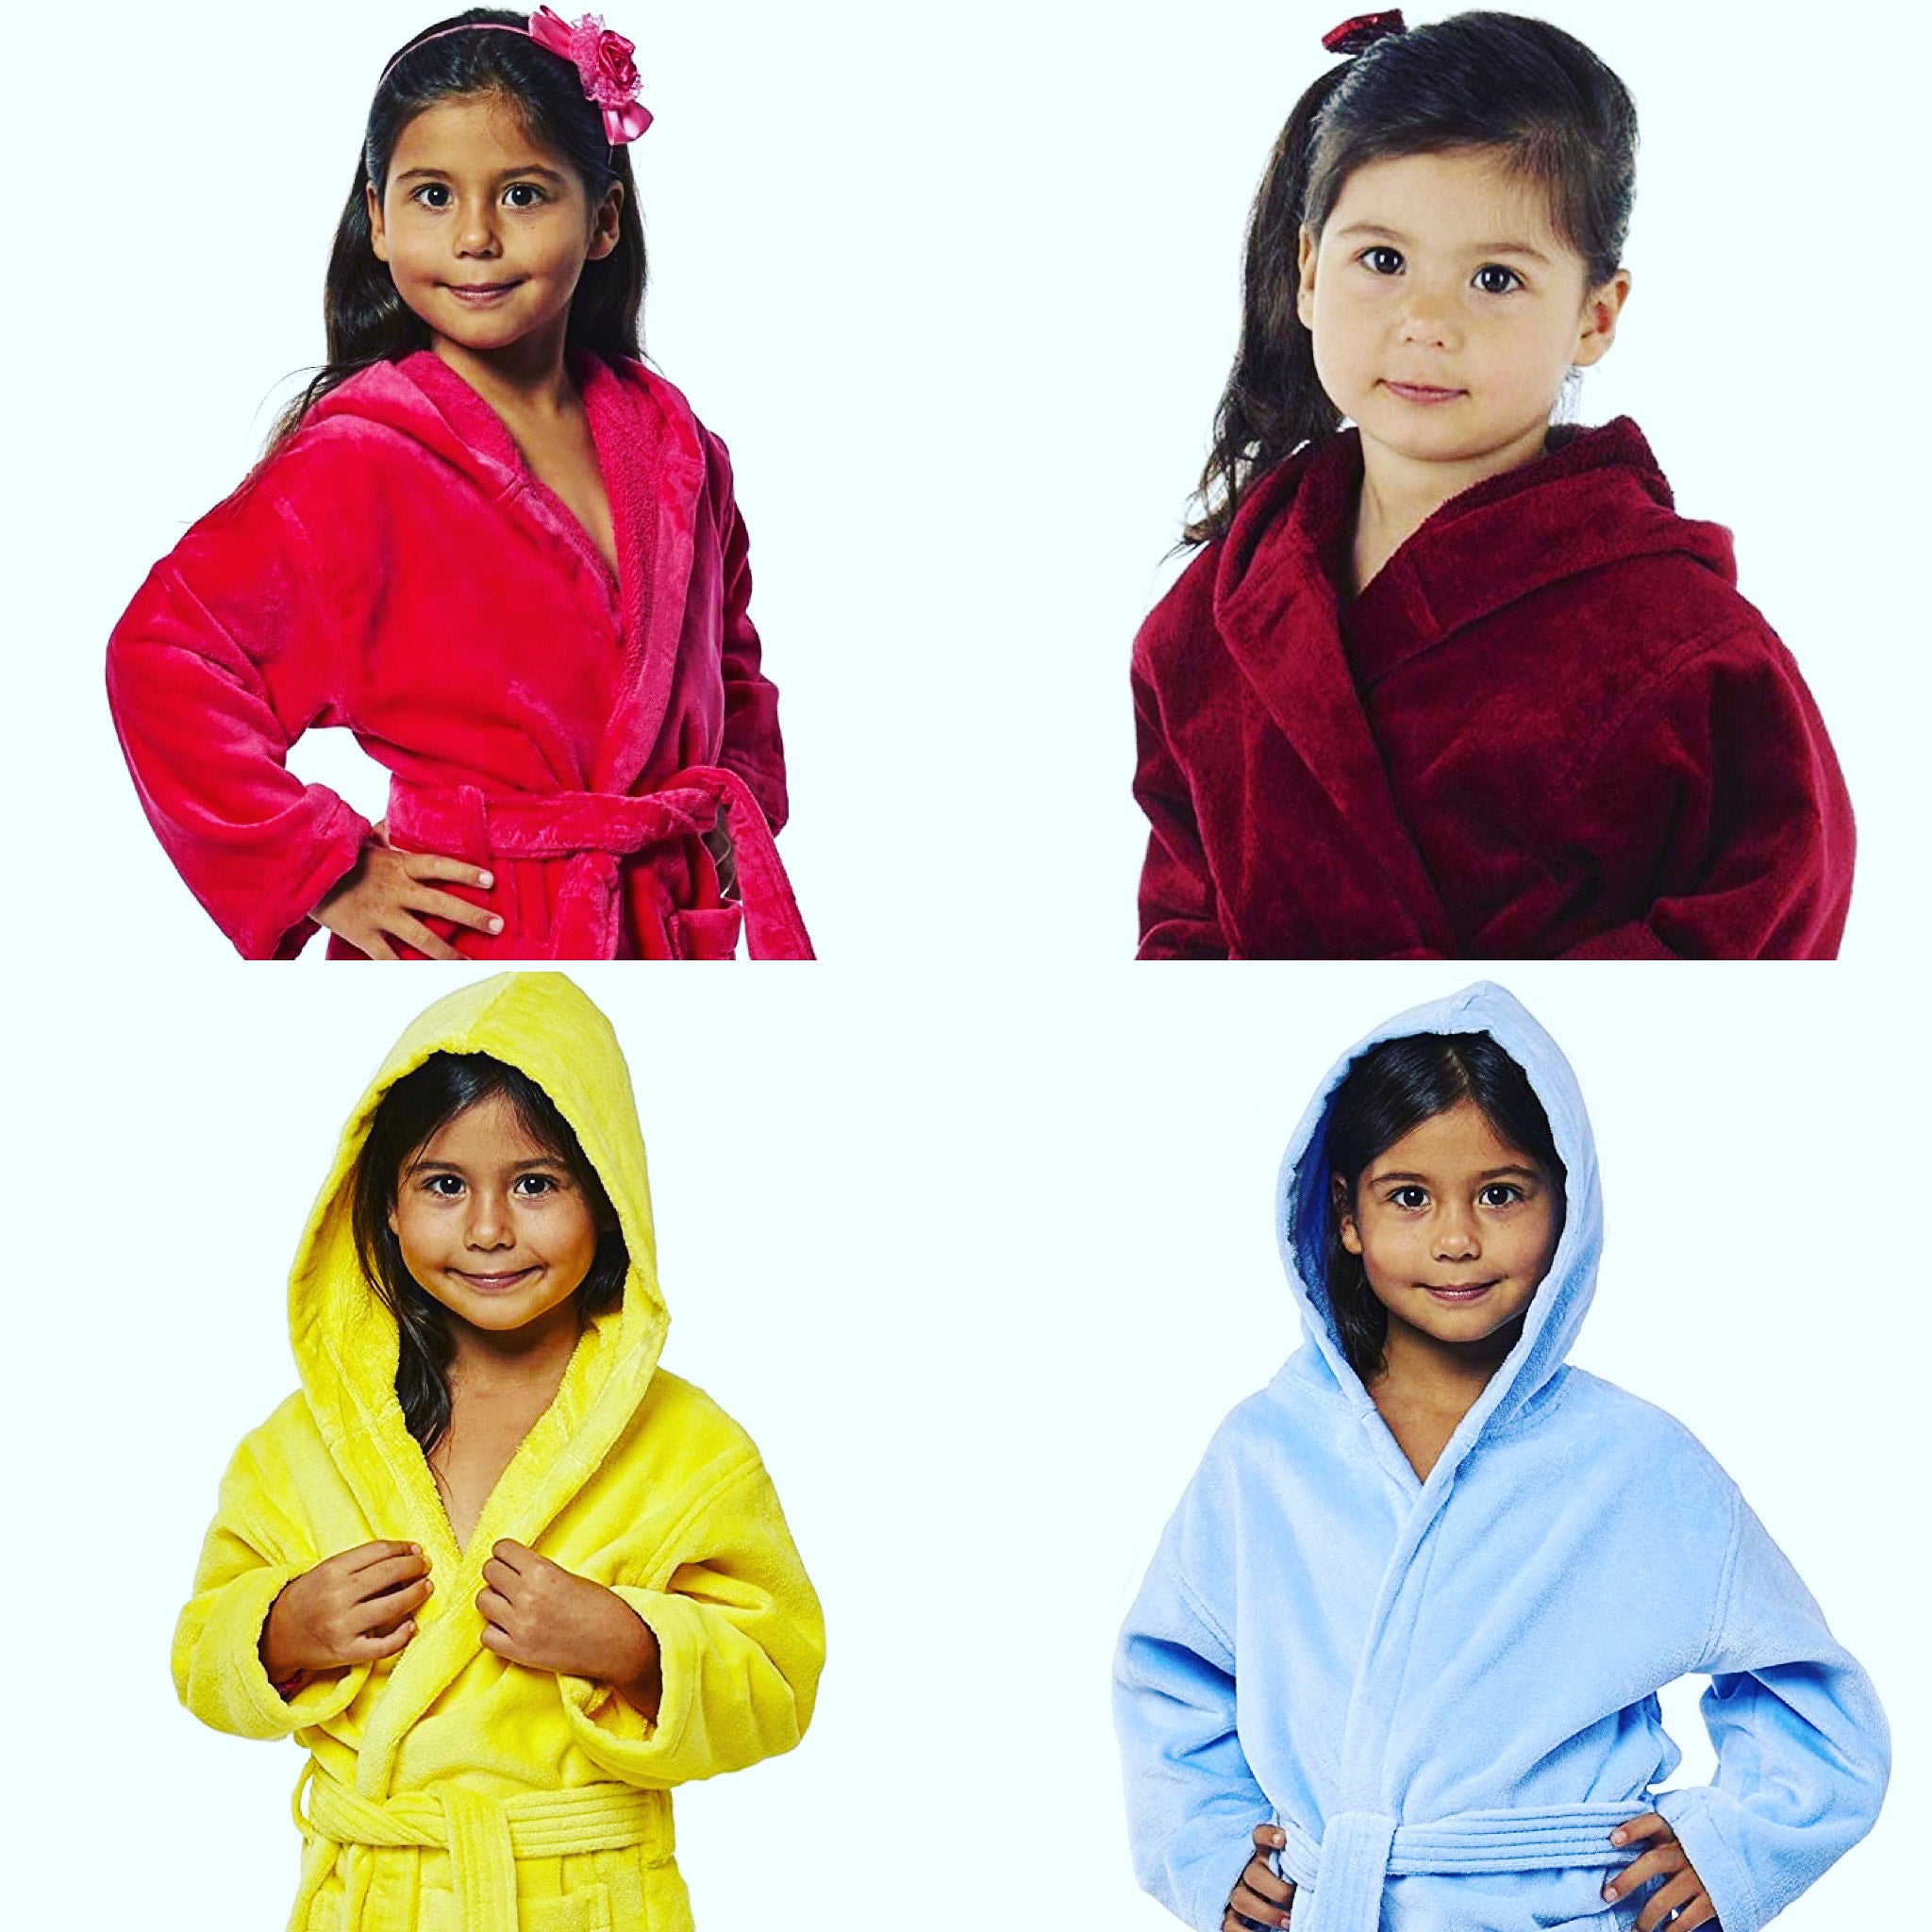 PARADOR® HOODED TERRY VELOUR 100% COTTON KIDS COVER UP